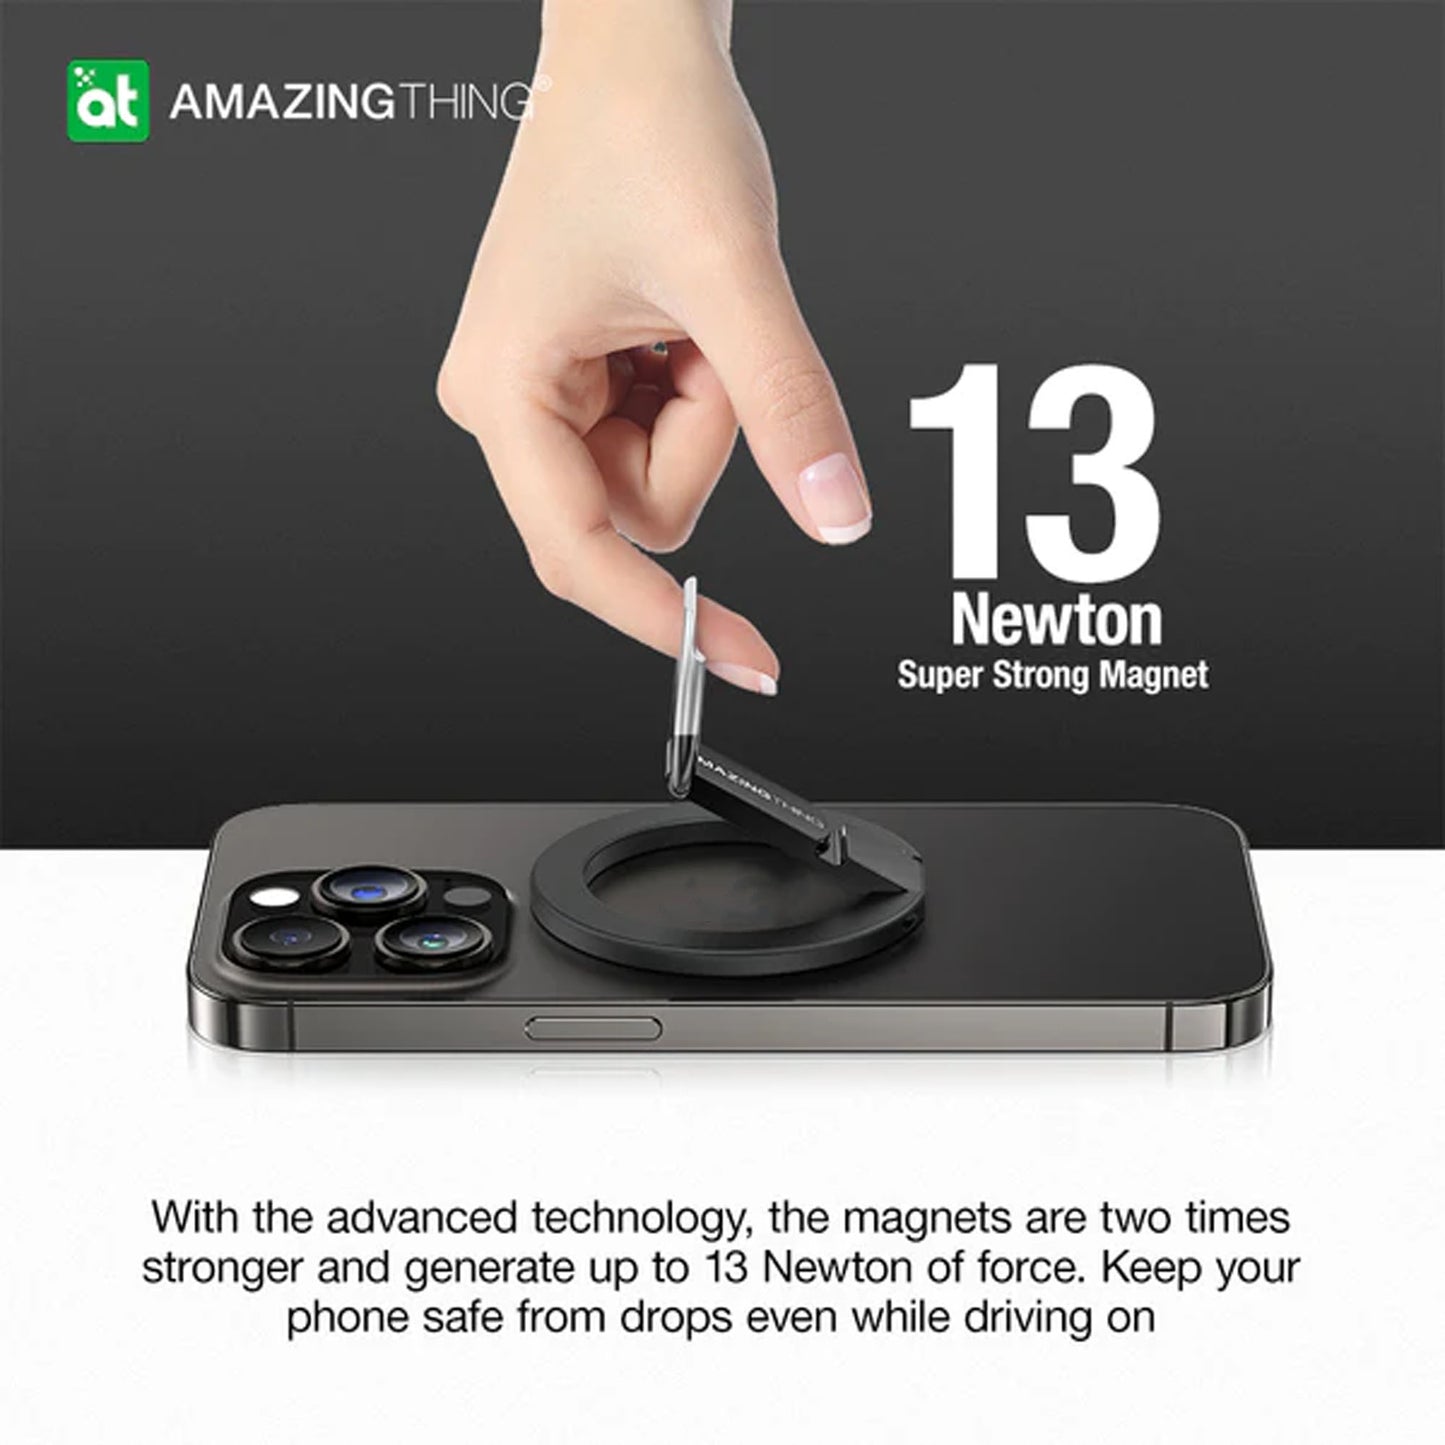 Amazingthing Titan Mag Magnetic Grip with Adjustable Stand - Black (Barcode : 4892878077651 )